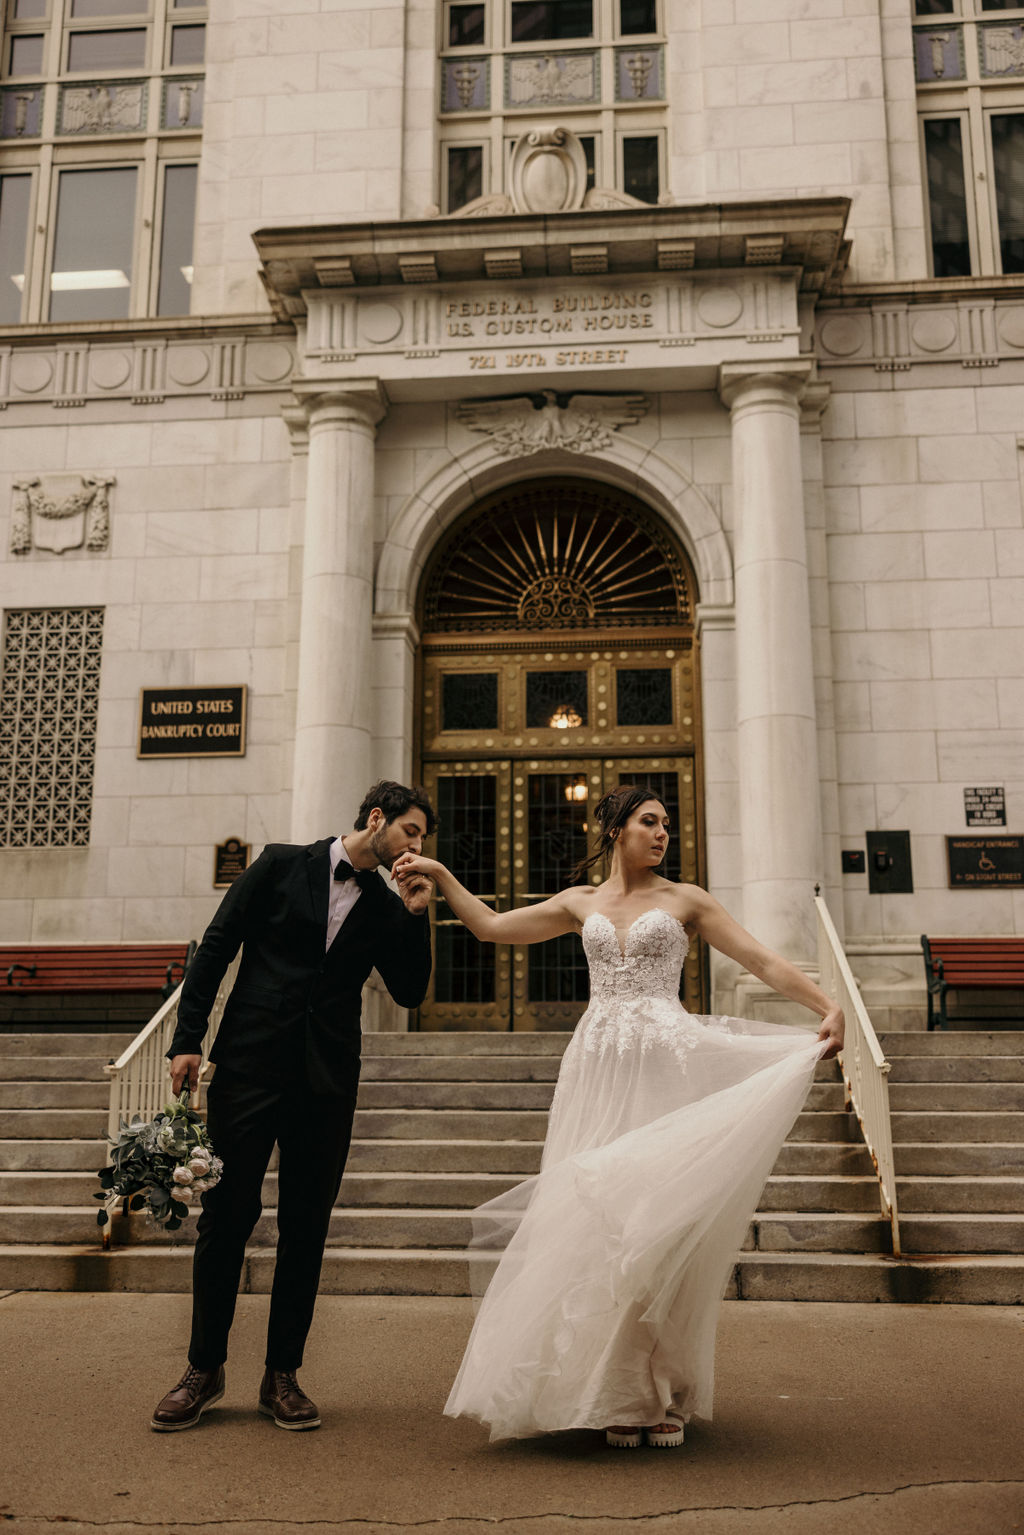 Why Renew Your Wedding Vows? Ideas, Reasons, + How-To: bride and groom dance outside of byron white courthouse in denver CO